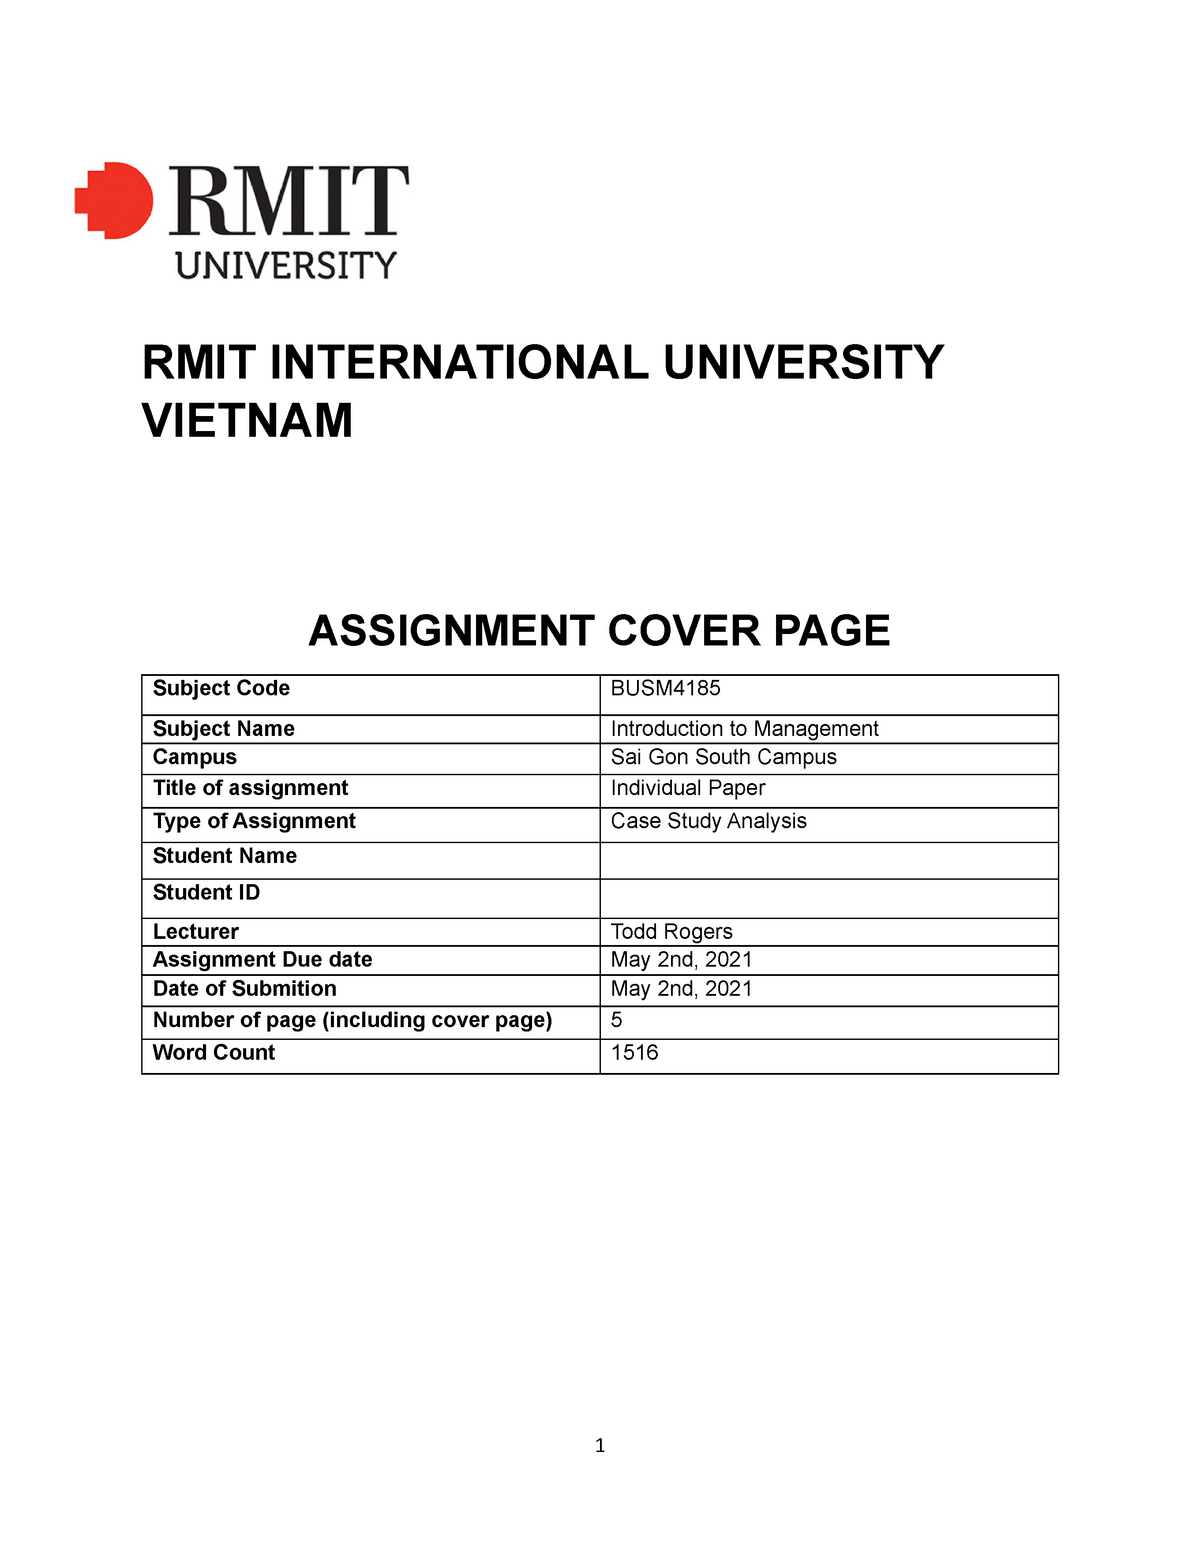 higher education cover sheet rmit